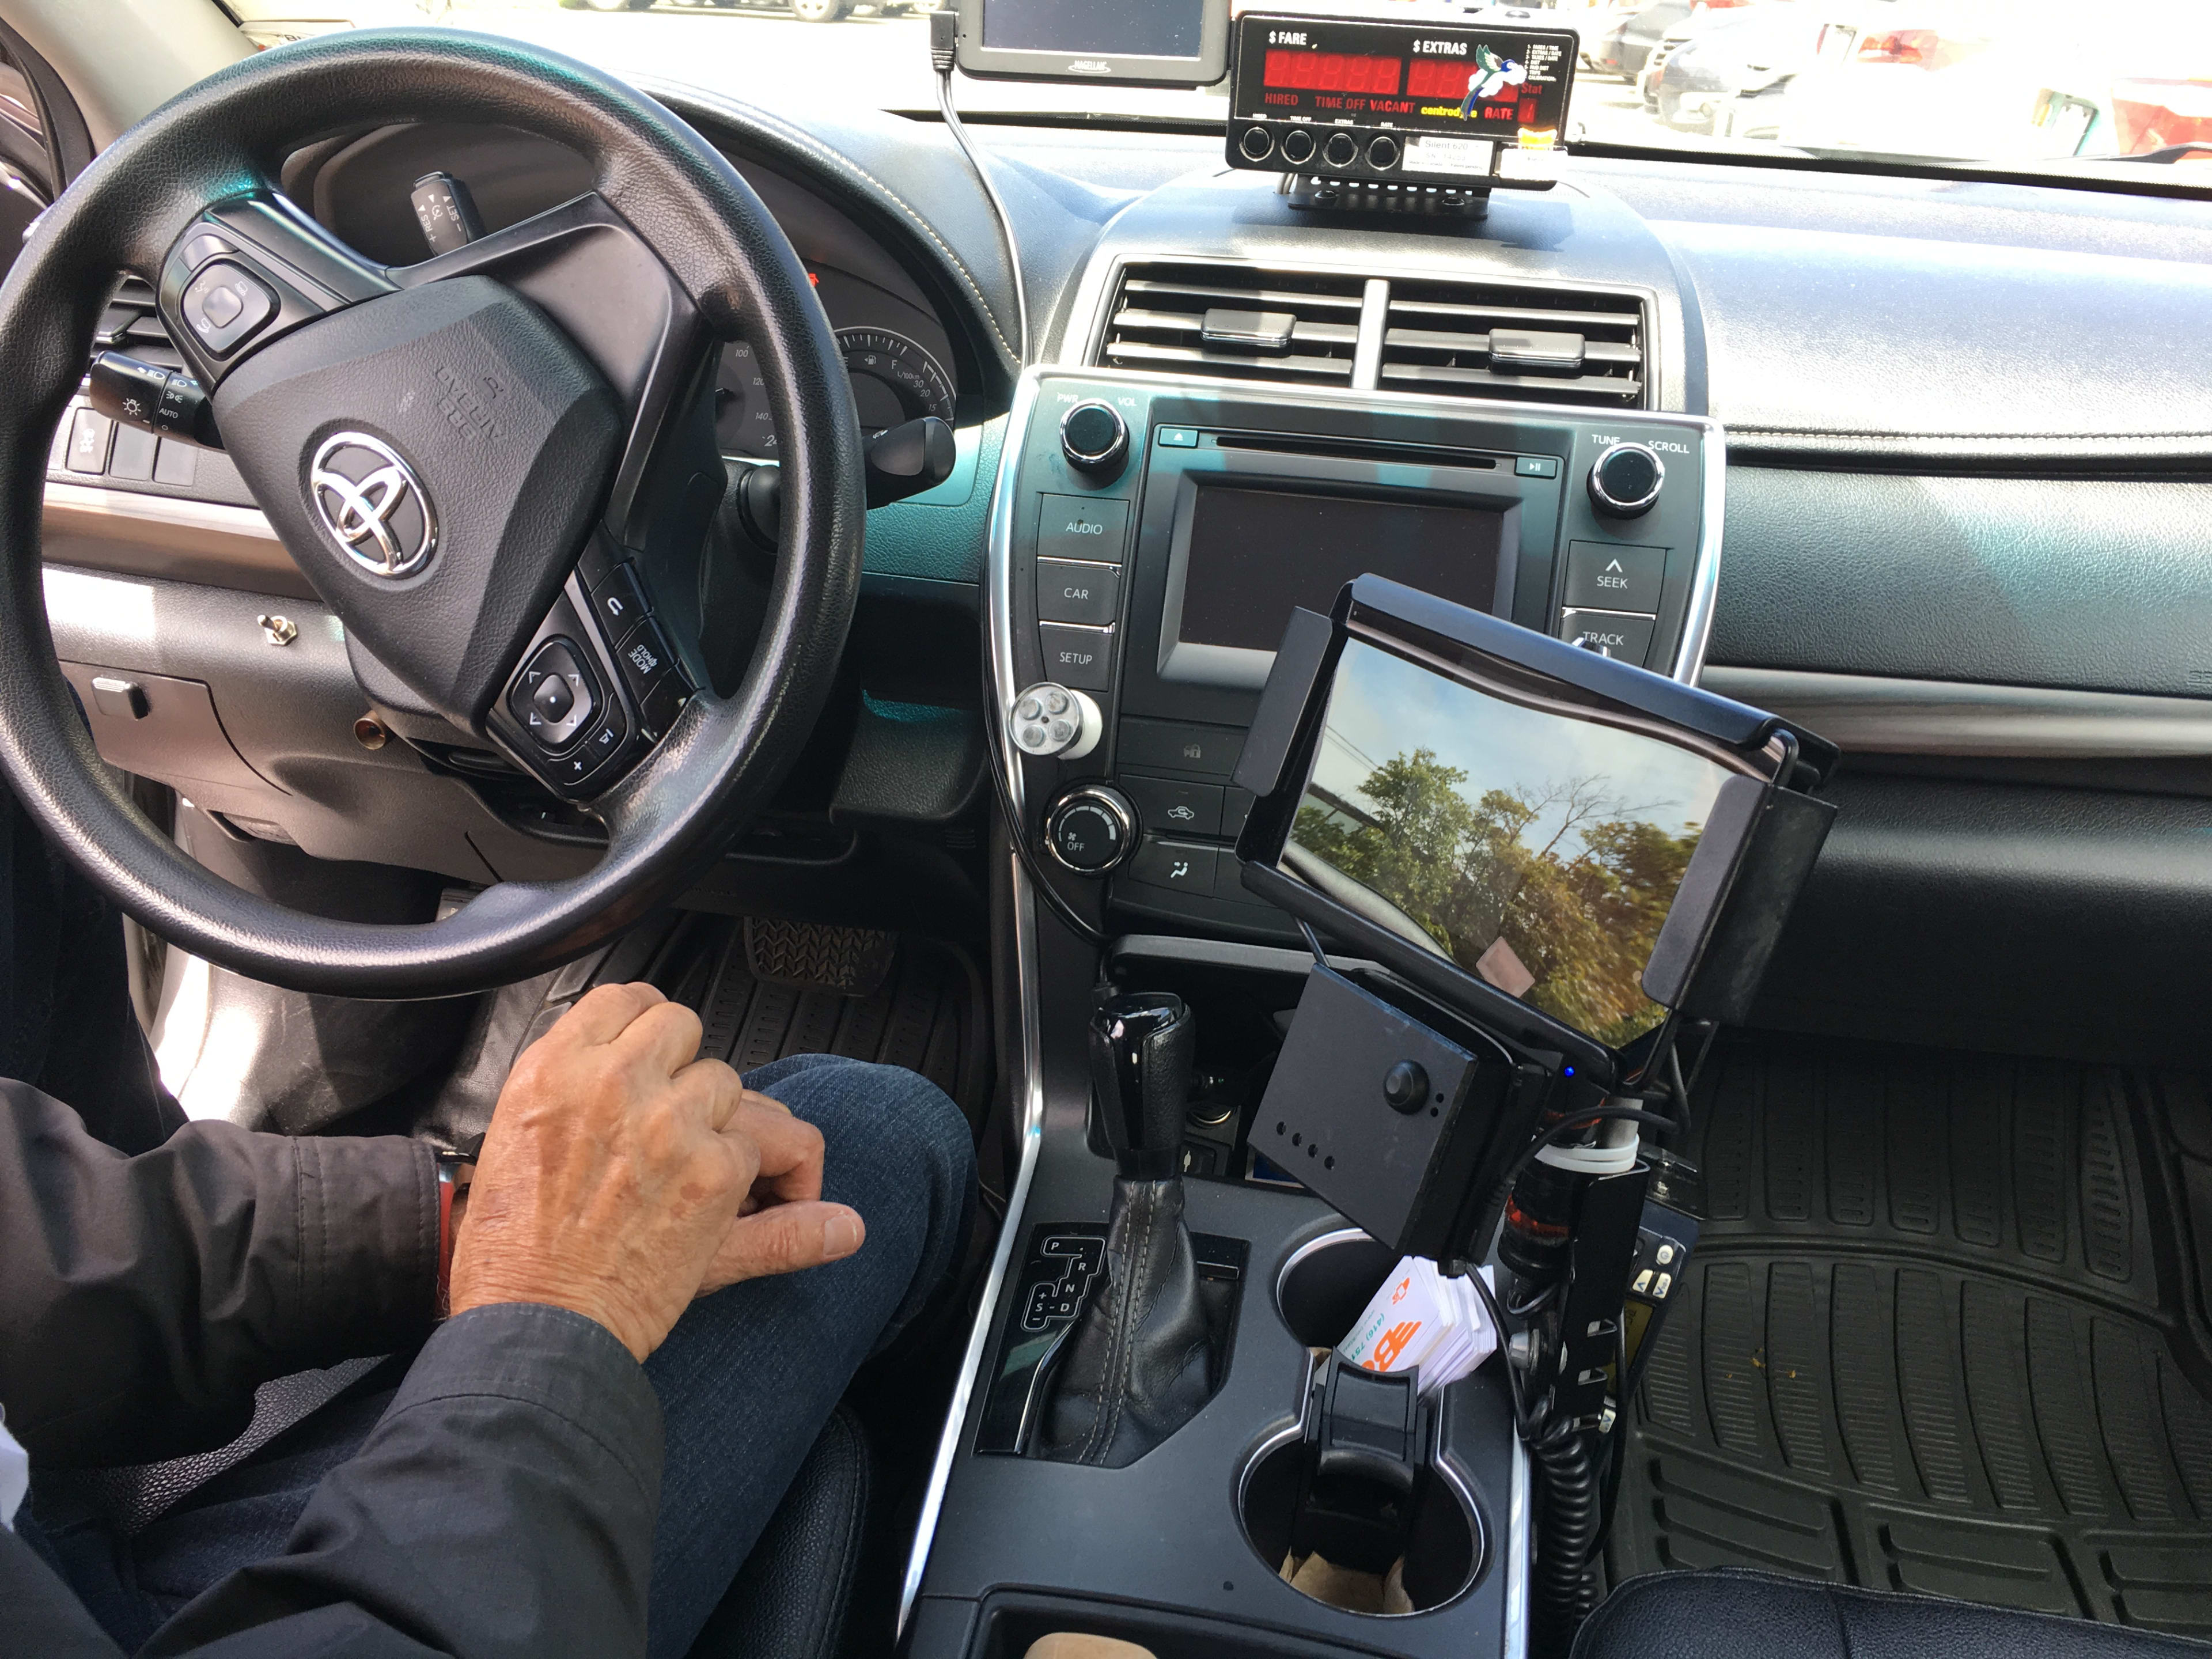 A driver sits in his vehicle, beside a payment system.